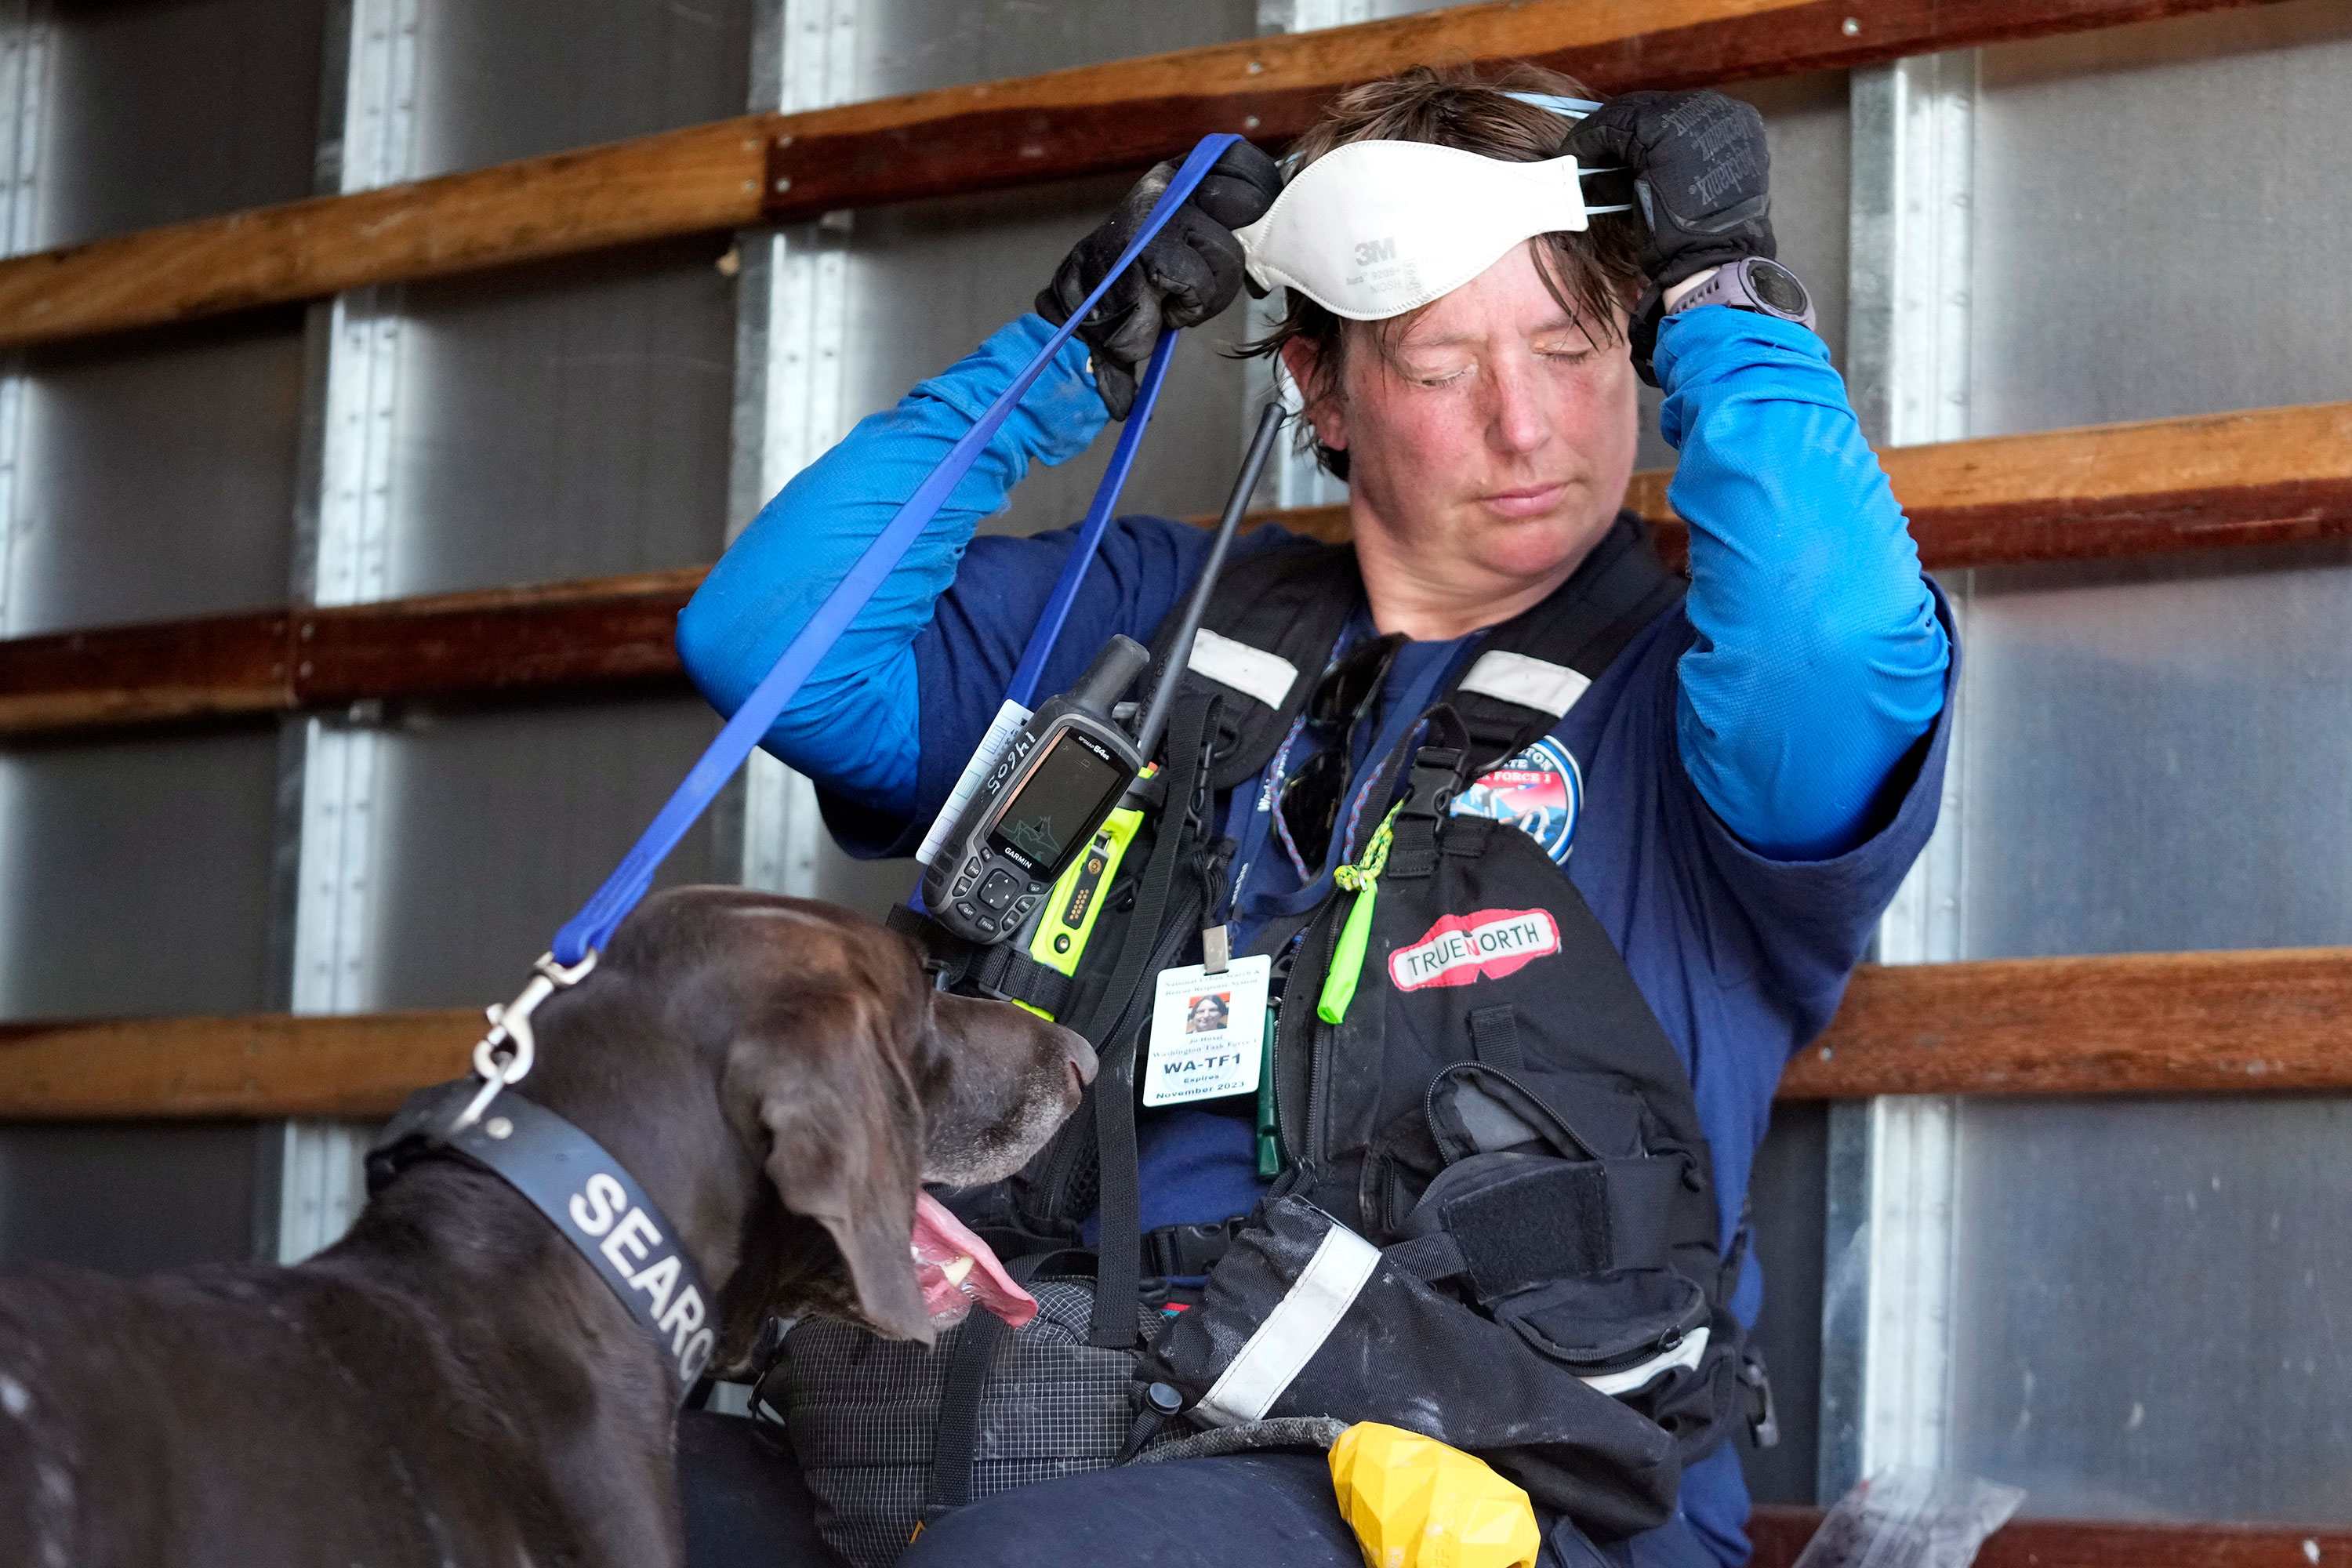 A member of a search-and-rescue team and her cadaver dog cool off near Front Street in Lahaina on Saturday.